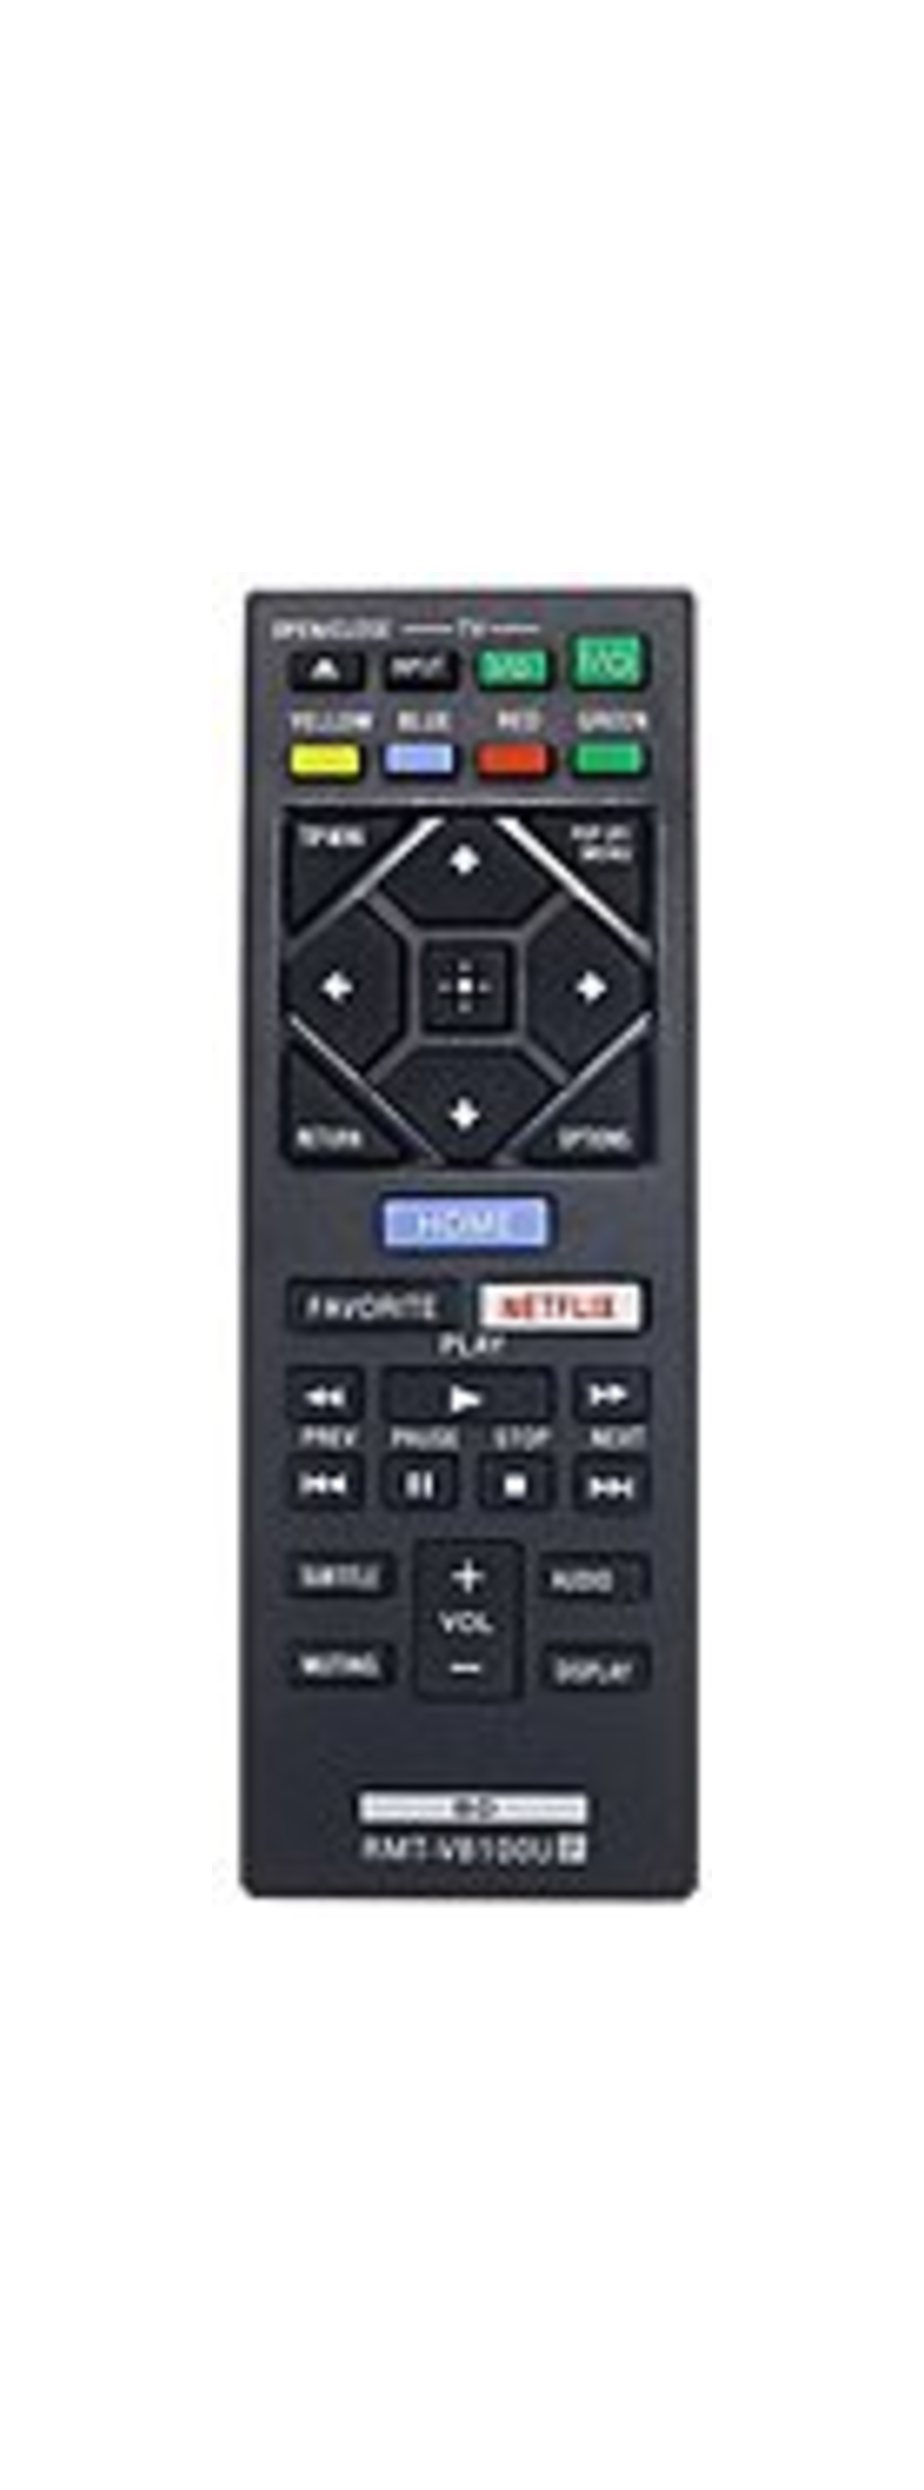 Replacement Remote for BDP-BX150 Blu-ray Disc Player - Battery Required - Sony RMT-VB100U